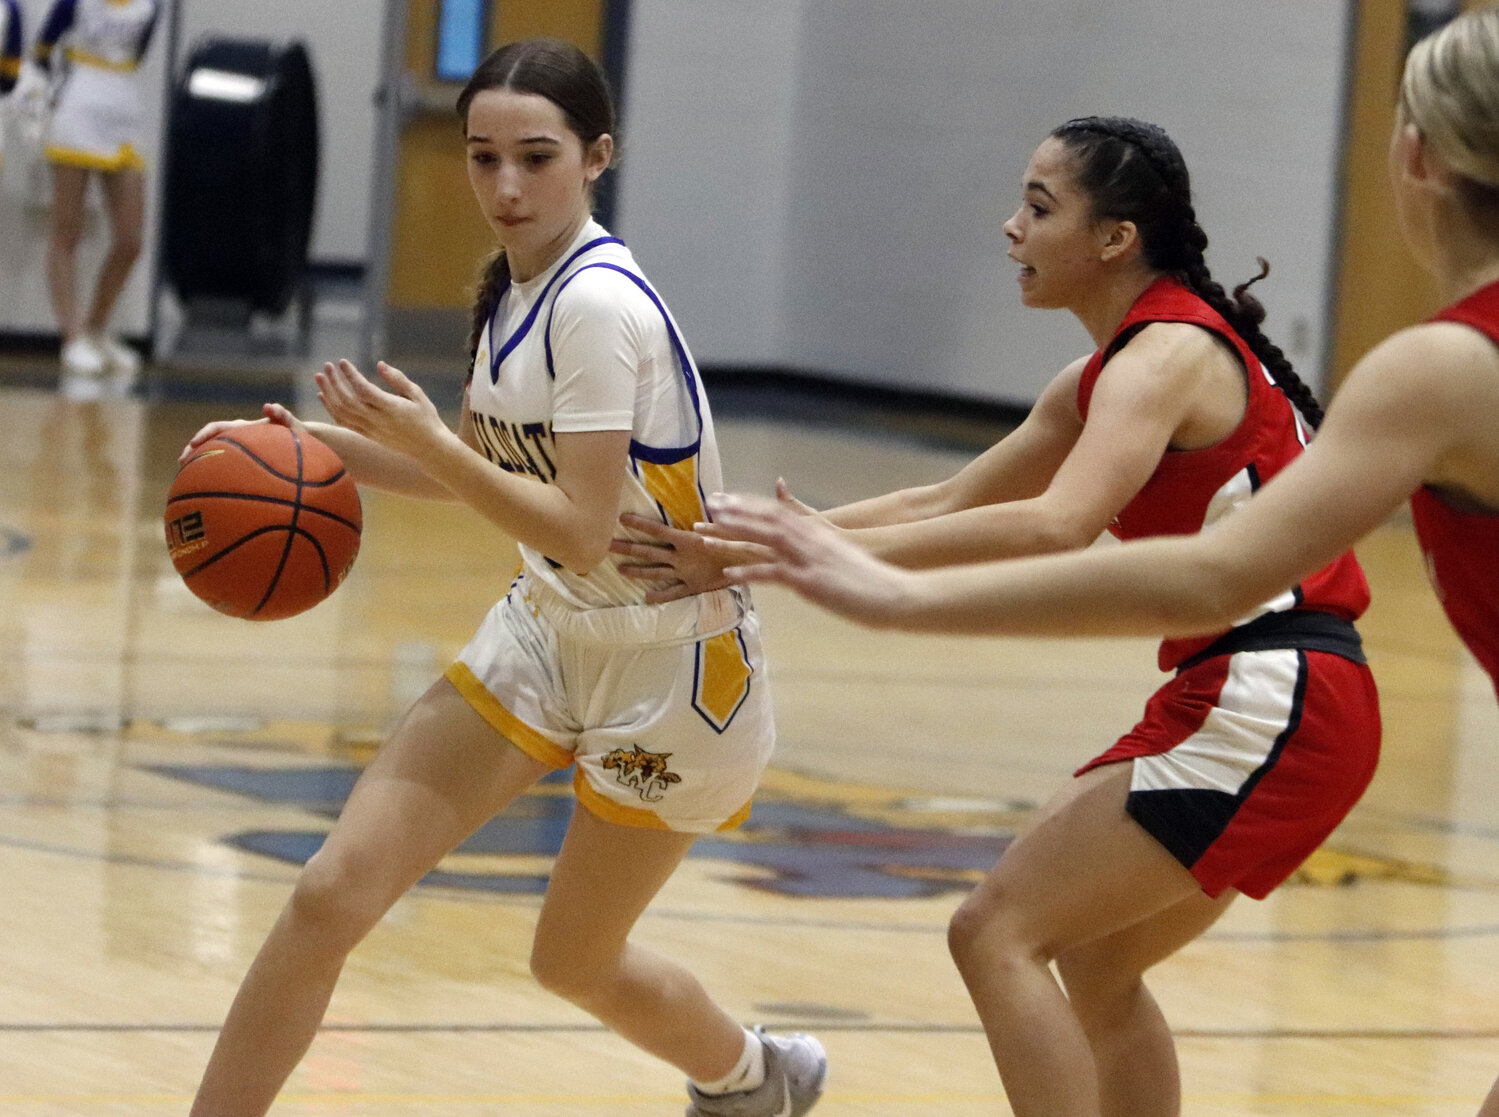 Kaitlyn Mikus (left) drives towards the basket during the second half of Tuesday night's game against Elsberry.